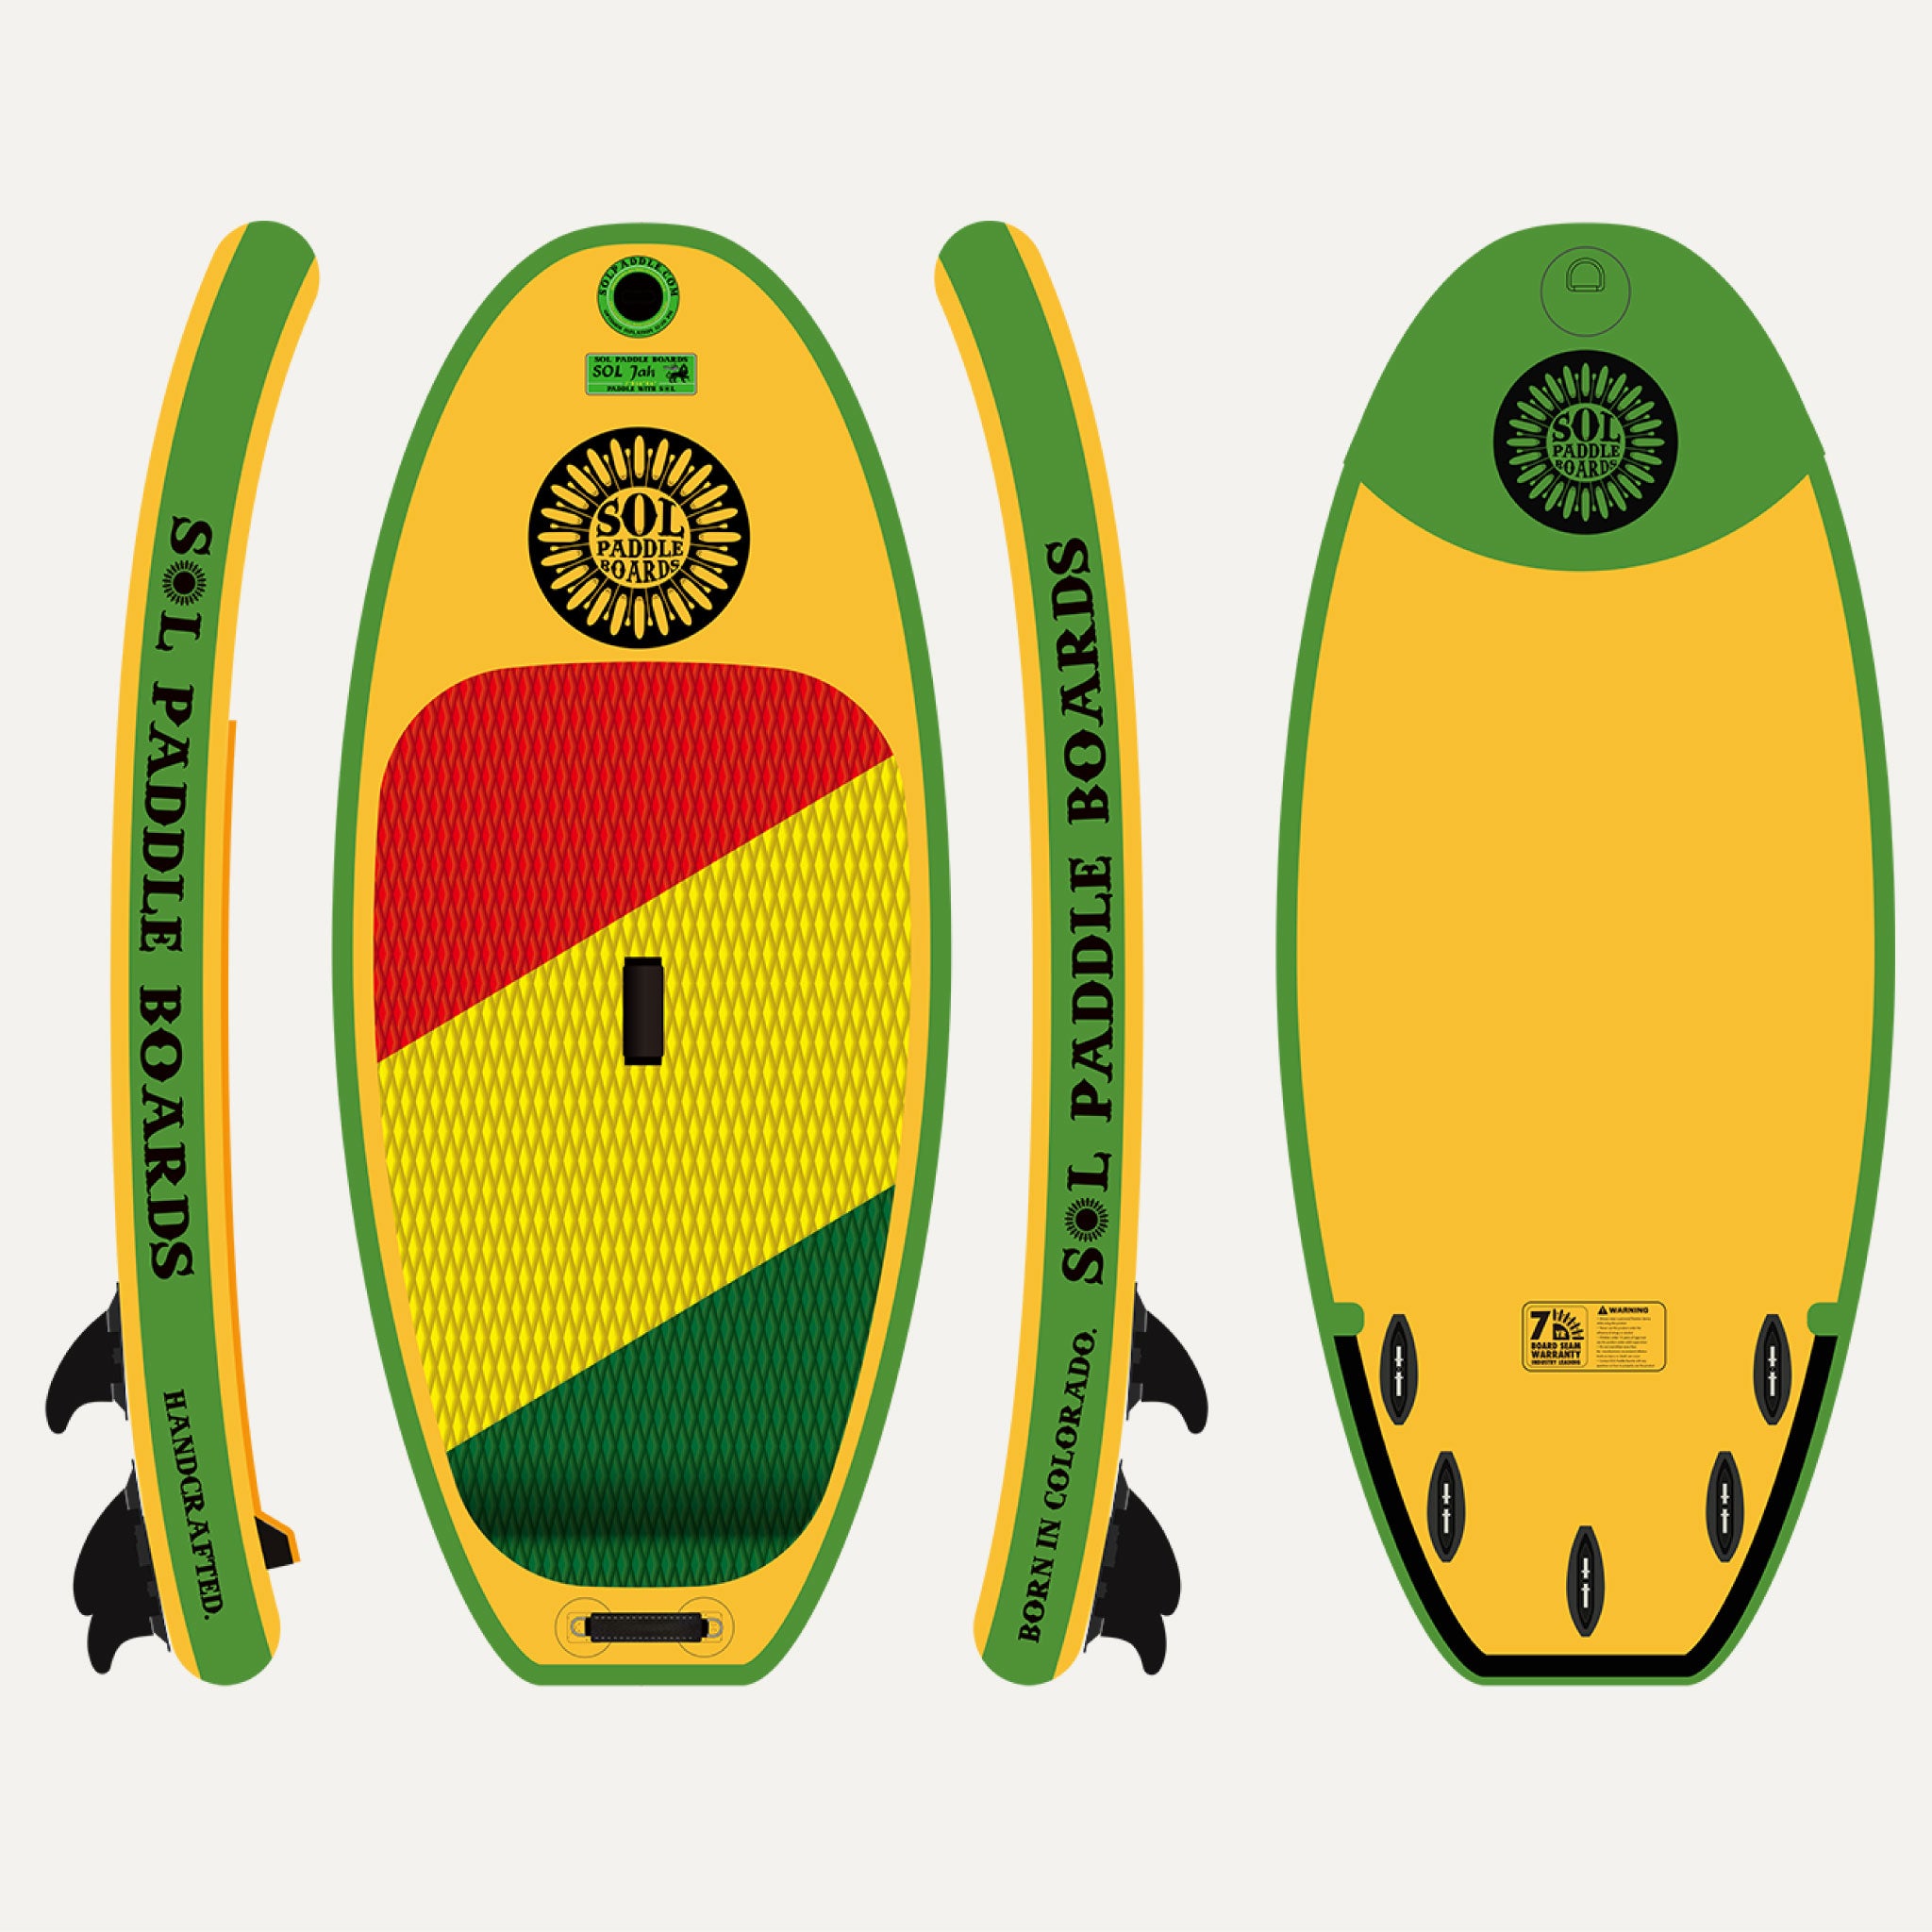 Classic SOLjah Inflatable River Surfboard showcasing all four sides of the river surfboard